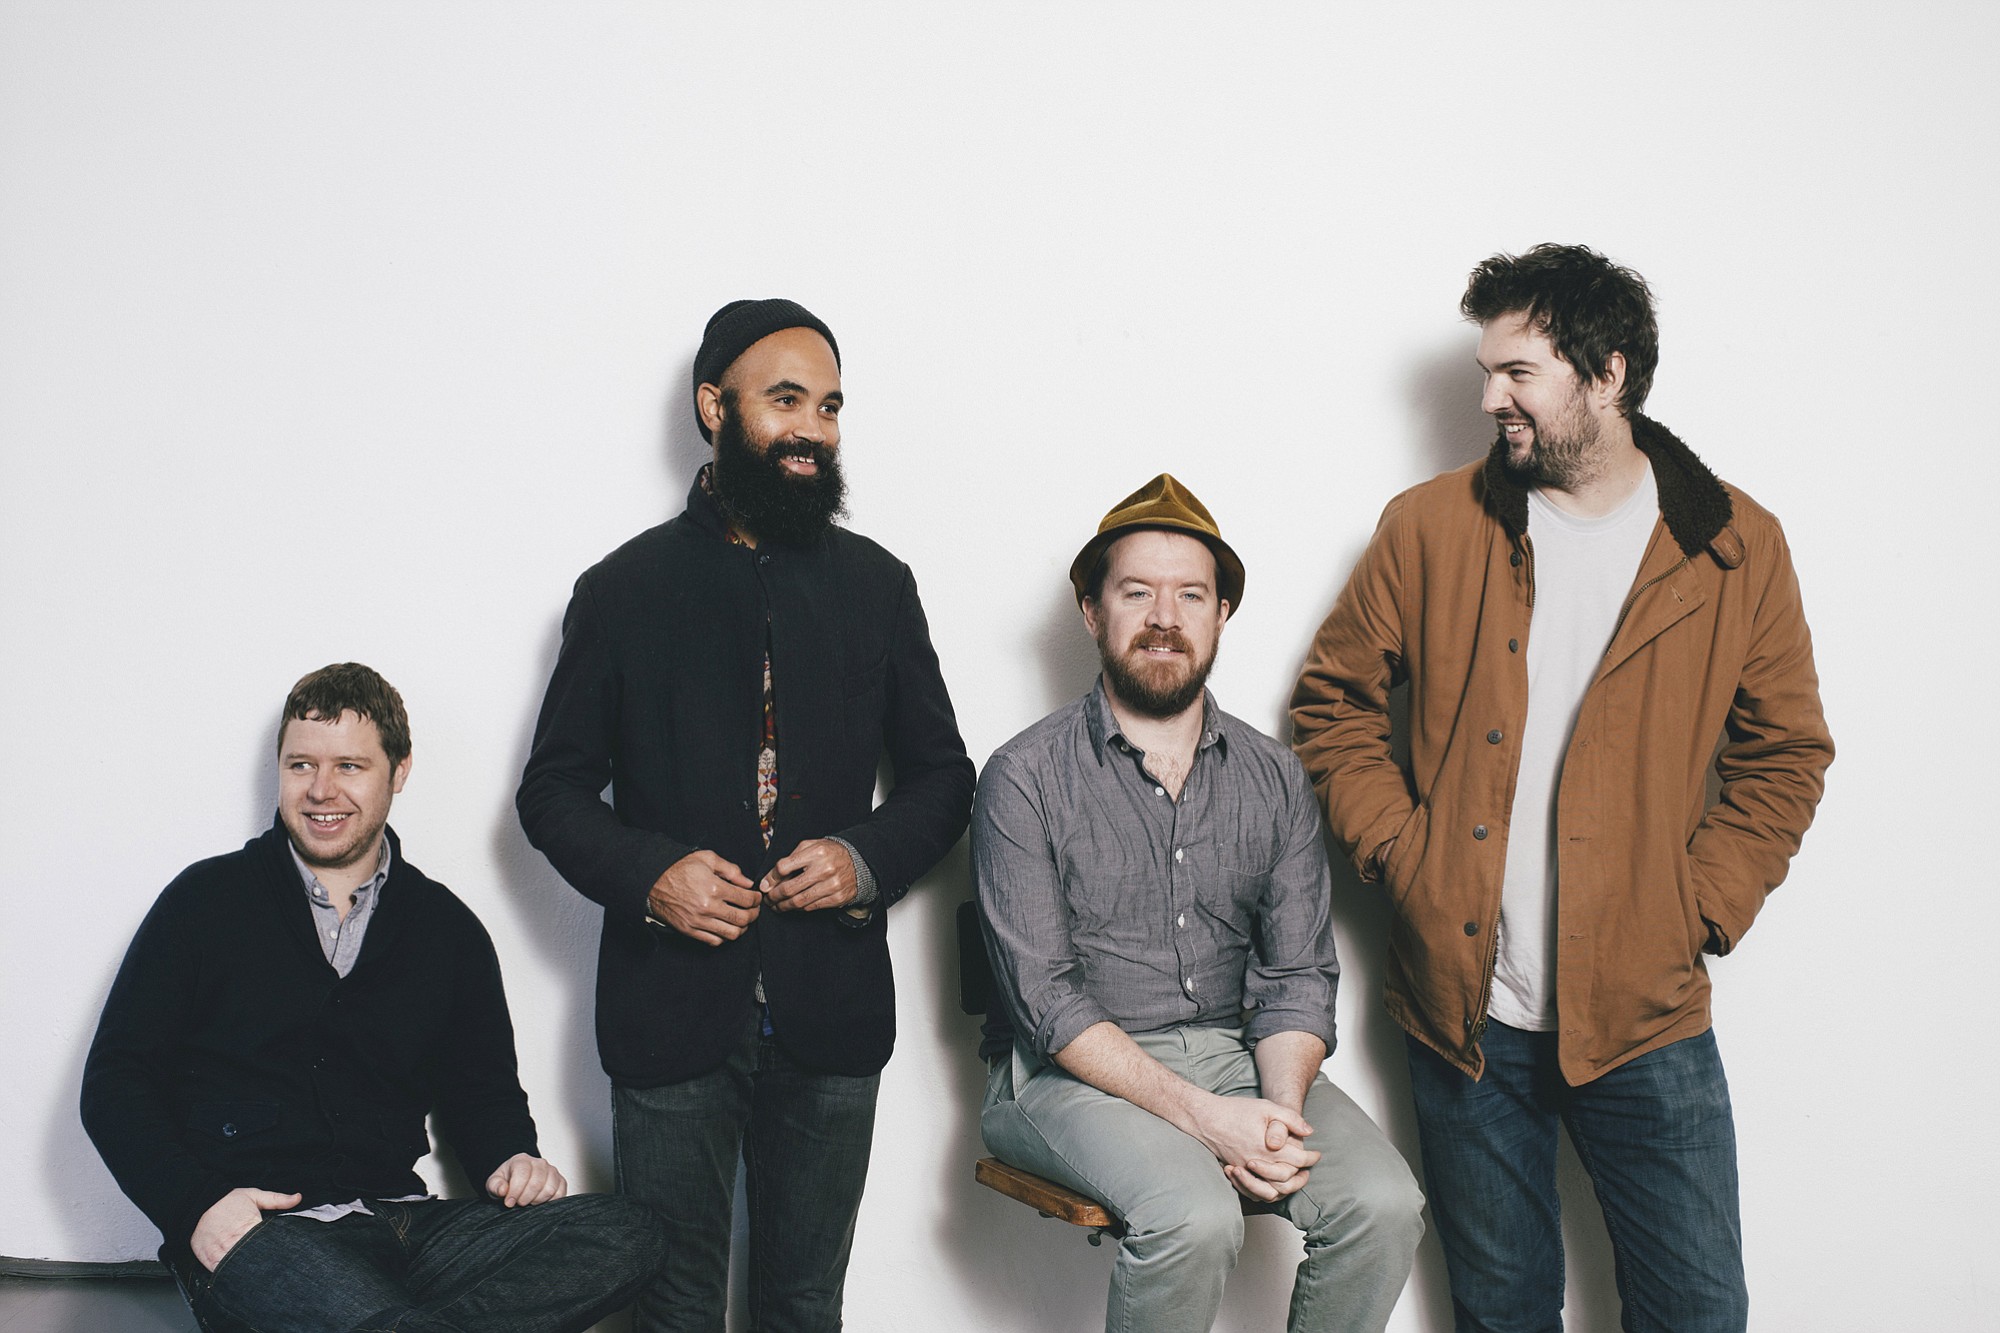 Seattle band The Cave Singers will perform with Yonder Mountain String Band, at McMenamins Crystal Ballroom in Portland.